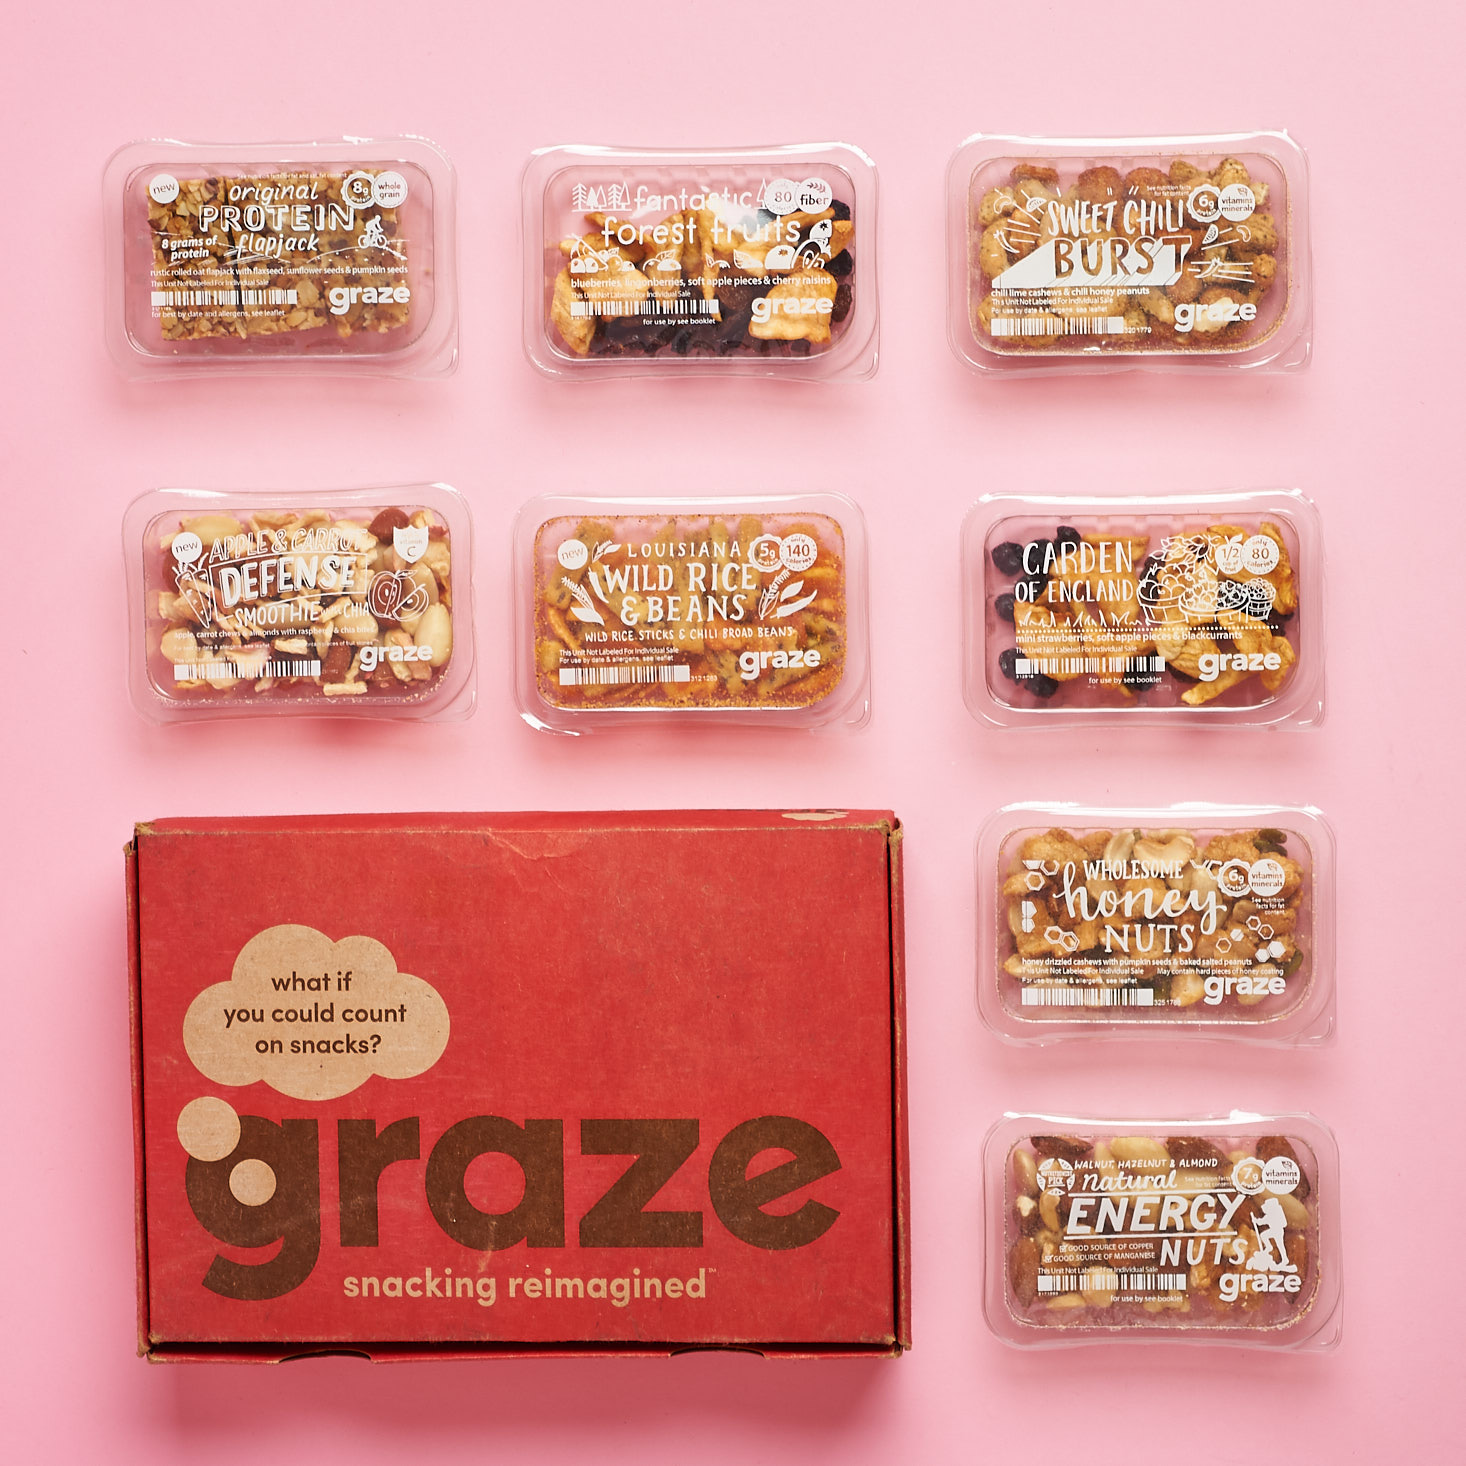 Graze 8 Snack Variety Box Review + Free Box Coupon – January 2019